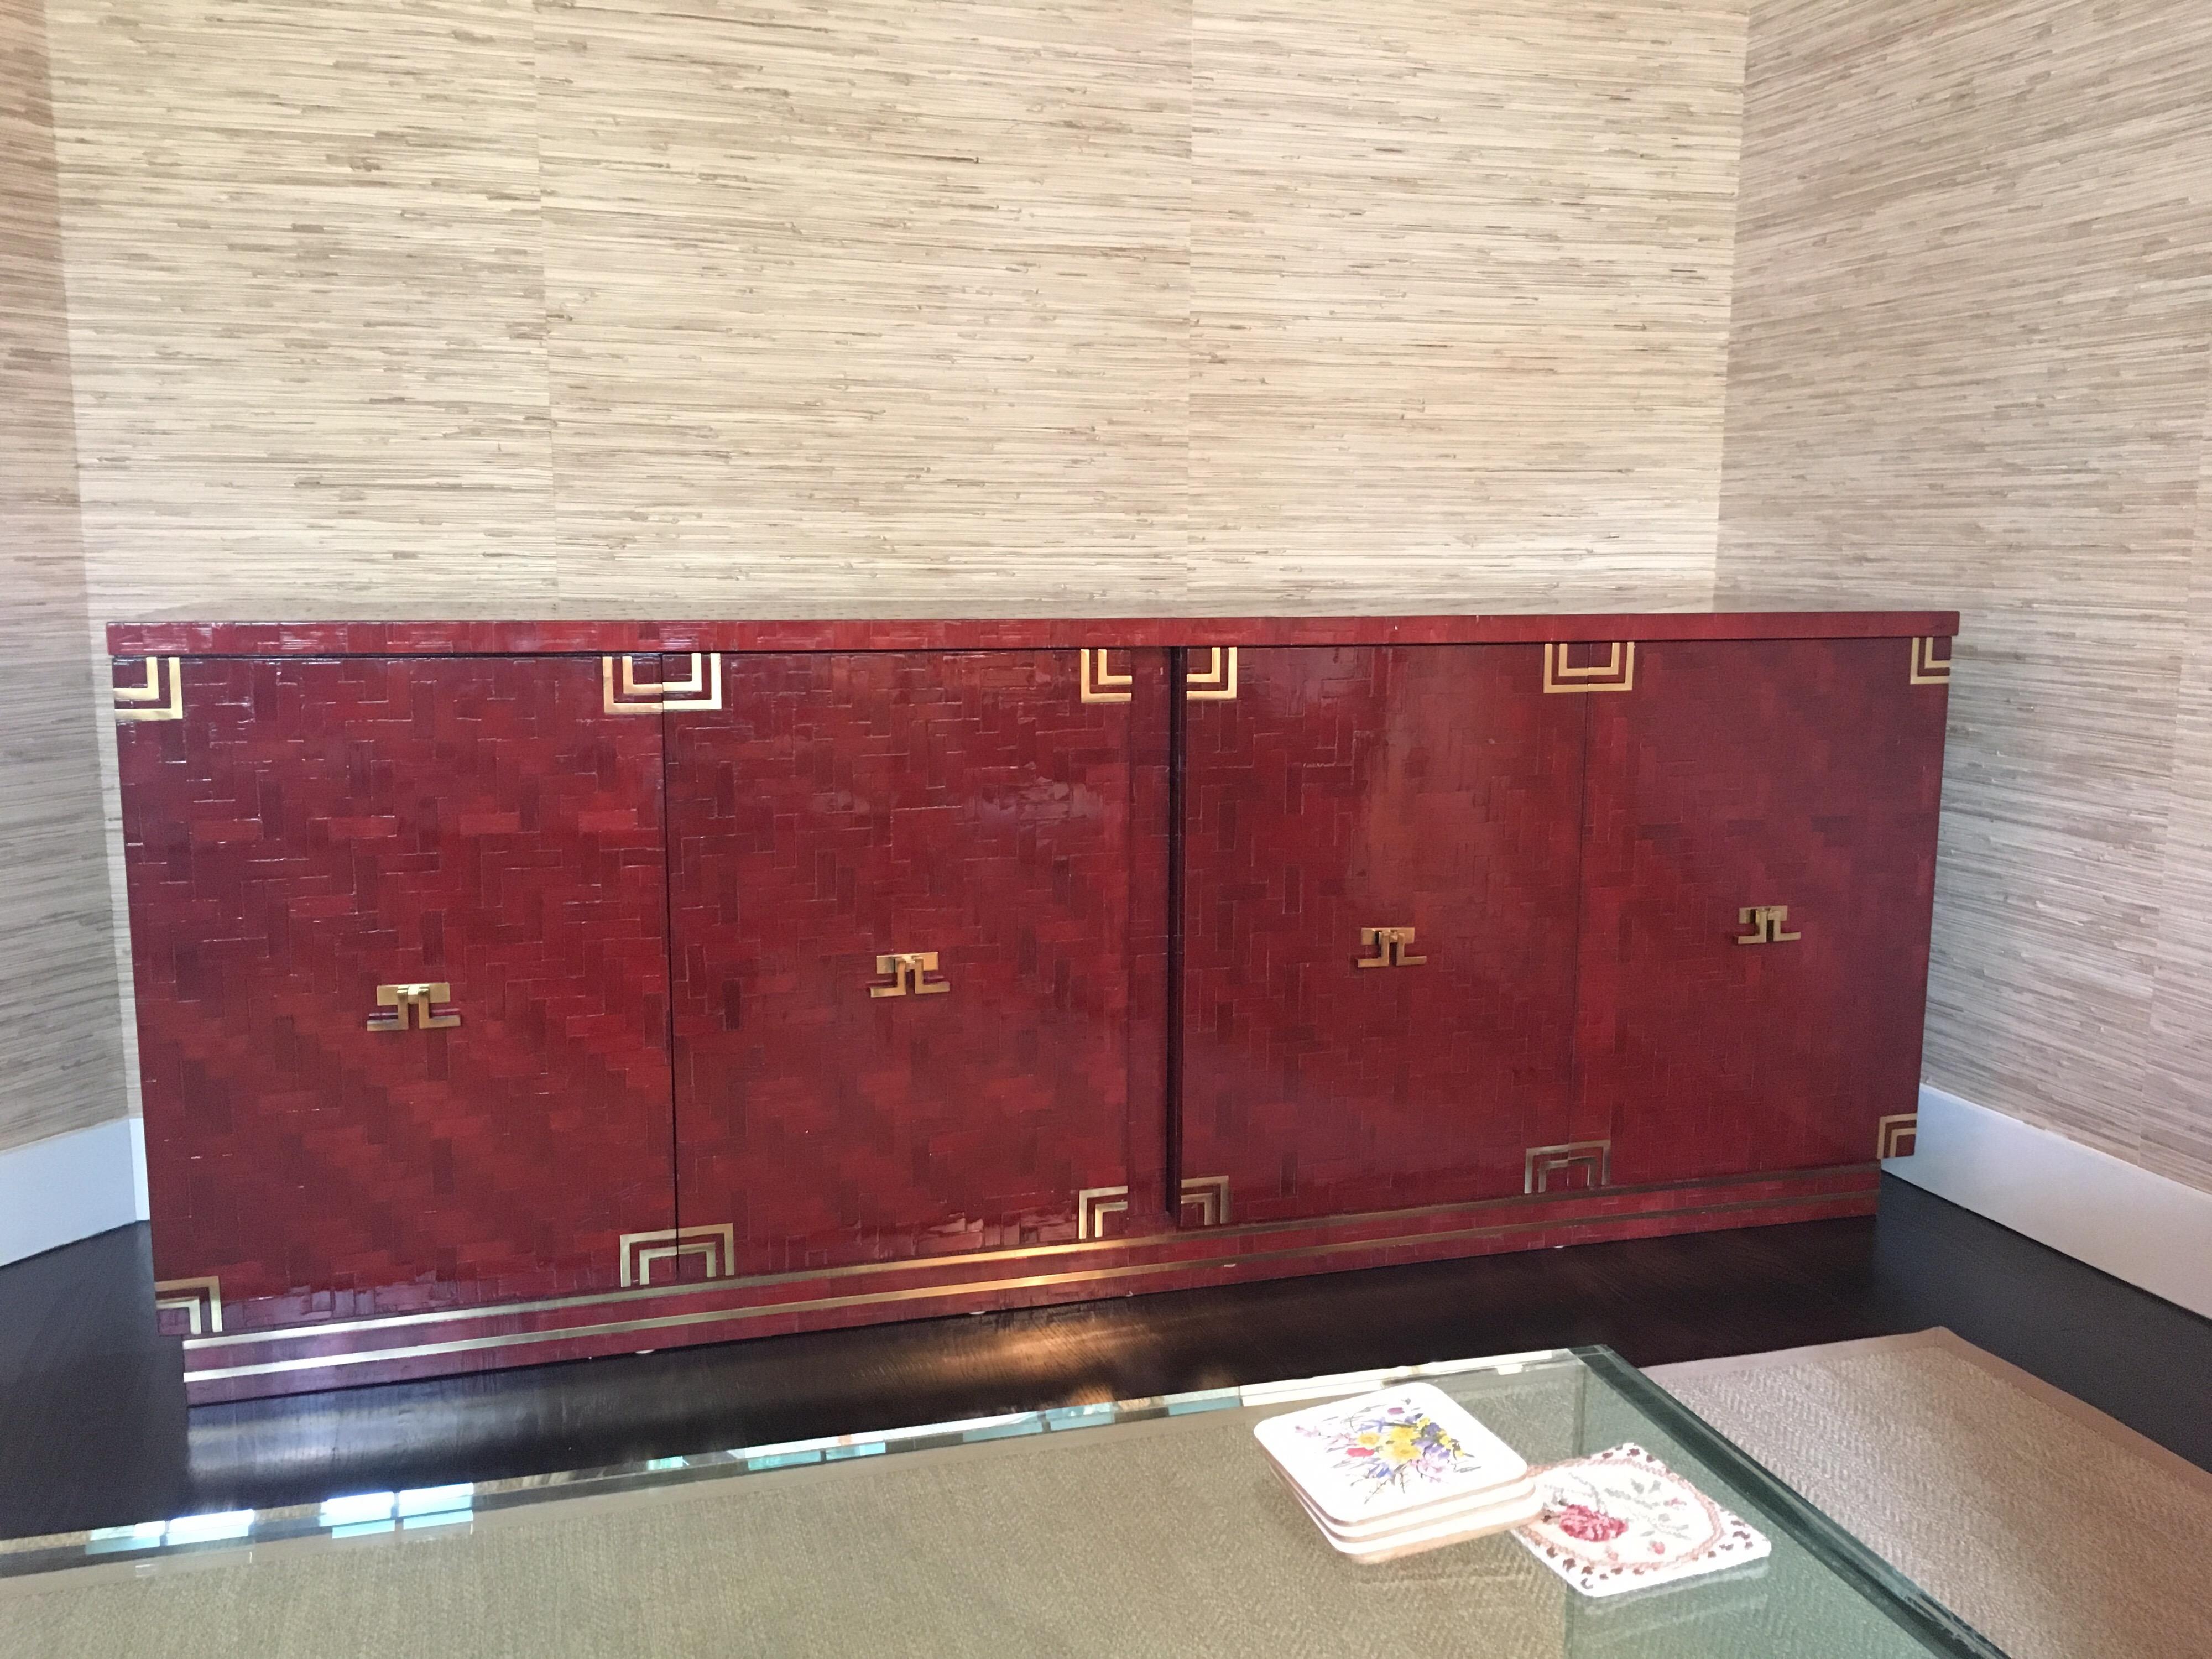 Lacquered Herringbone credenza with brass hardware. Lacquered in a brown-reddish color.

This piece is priced to sell as we have a deadline to move this.

Overall dimensions: 83.75